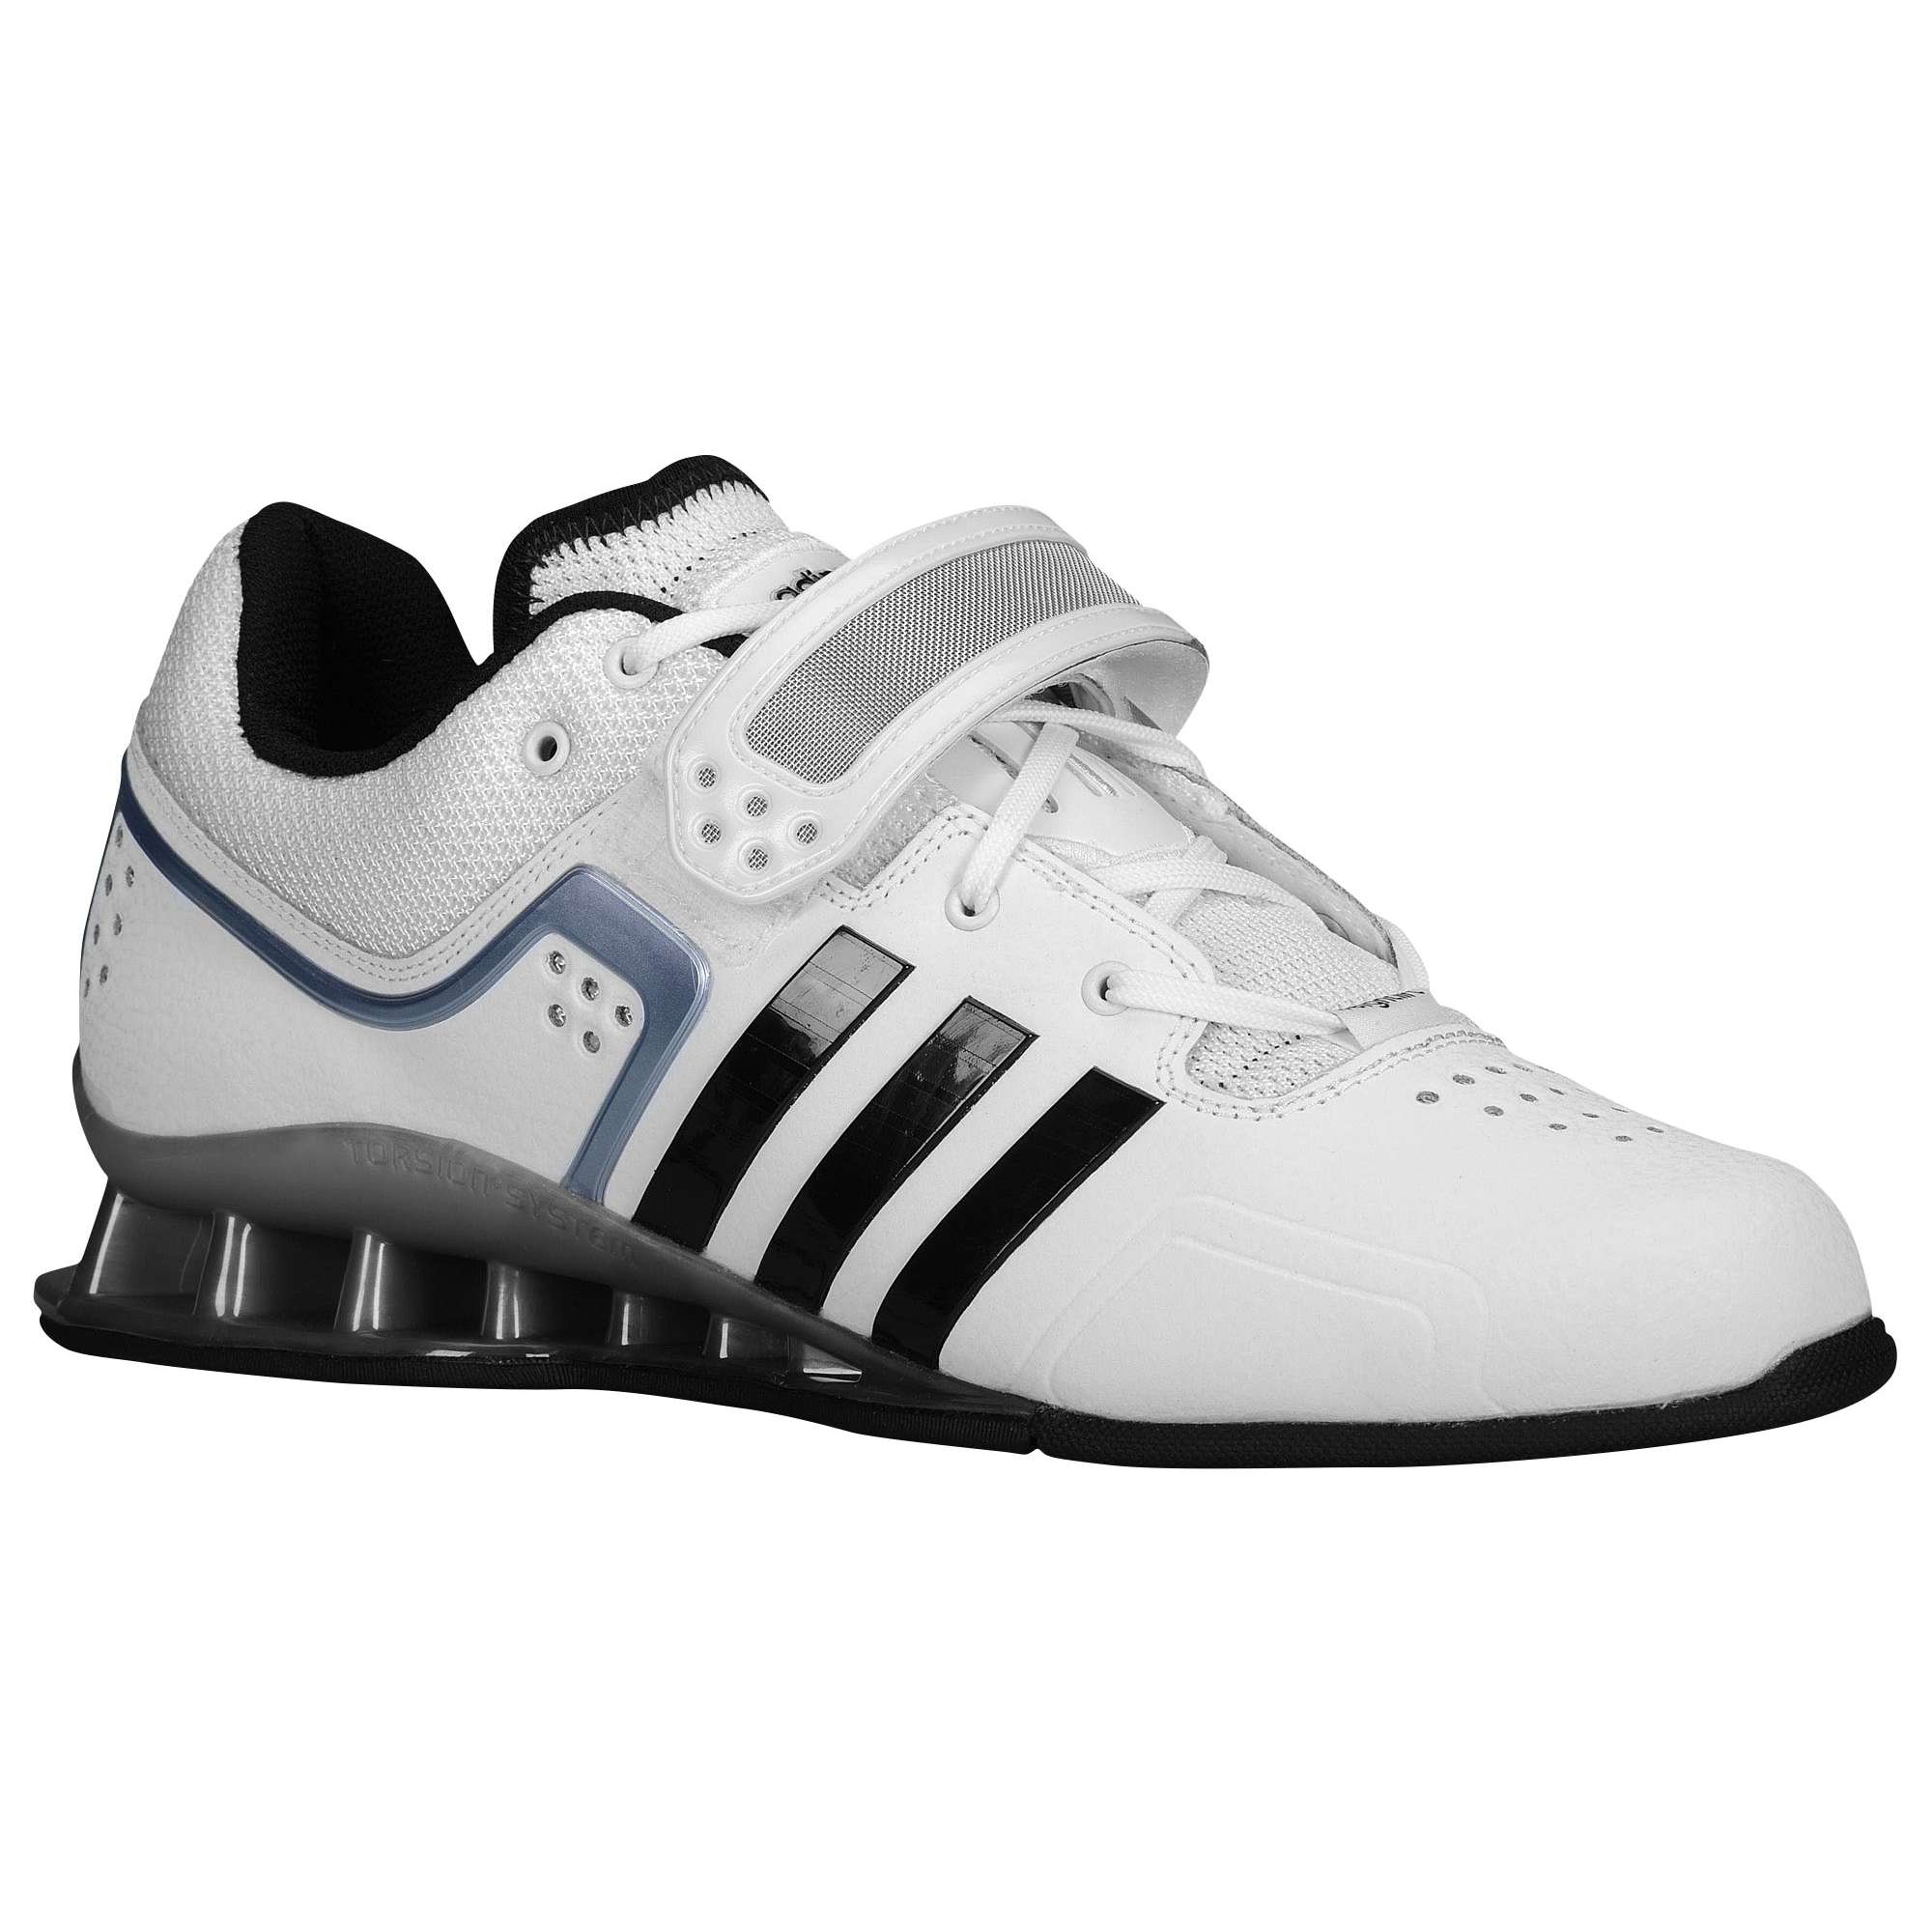 Adidas AdiPower review - Guide to Weightlifting Shoes